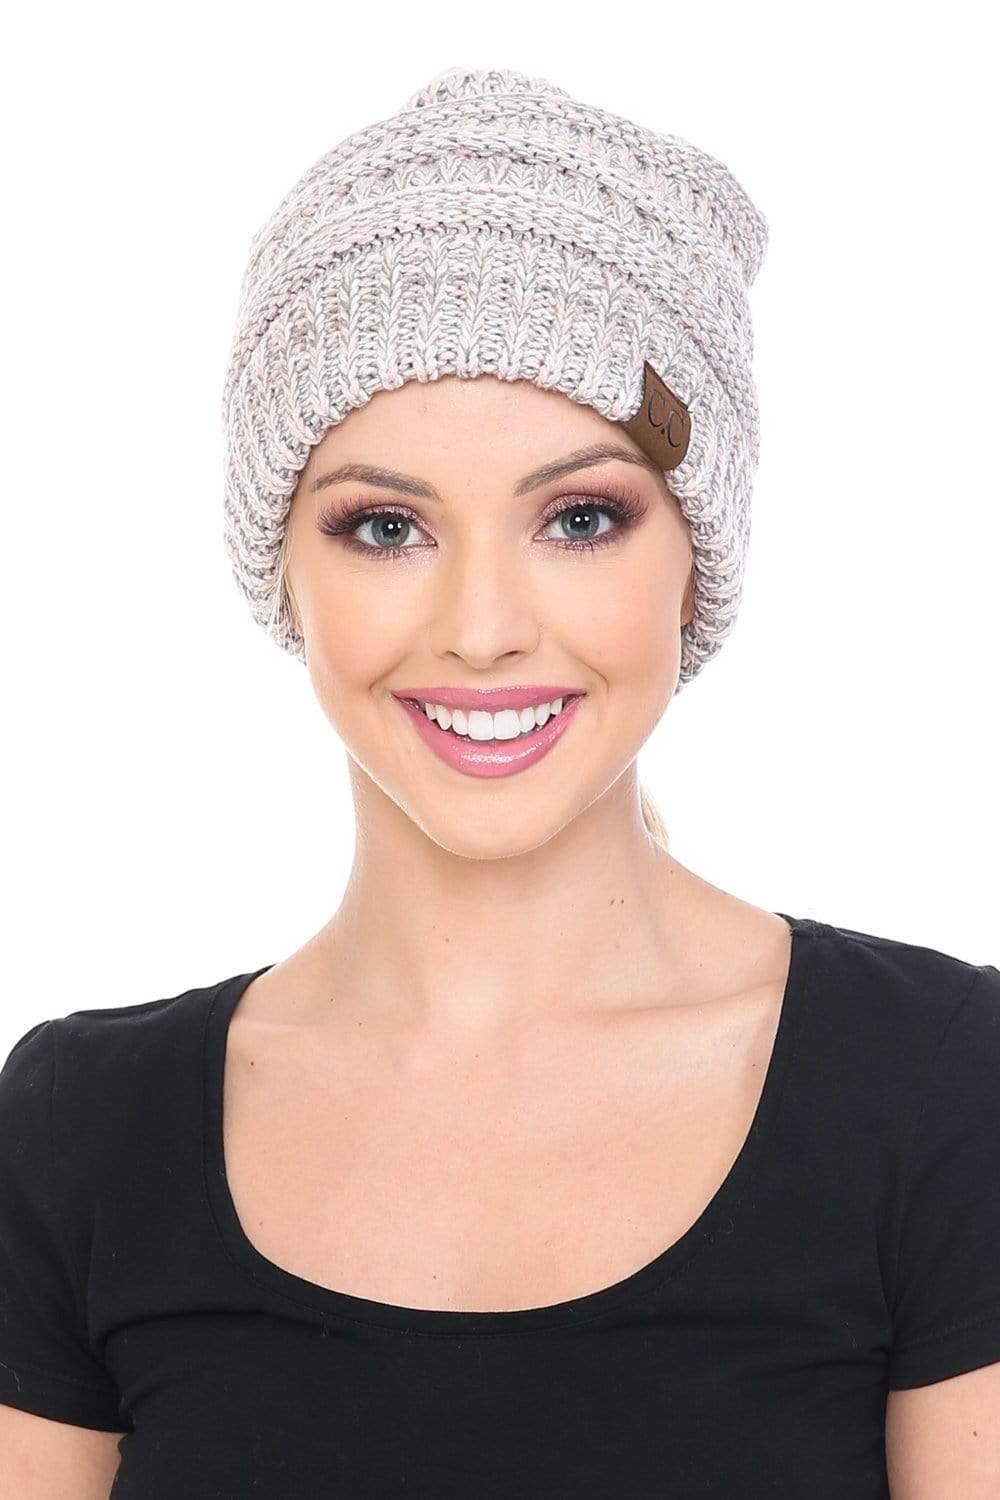 C.C Apparel C.C MB6242 - Soft Stretch Cable Knit Warm Ponytail Hat 3 Toned Mixed Multi Color Beanie